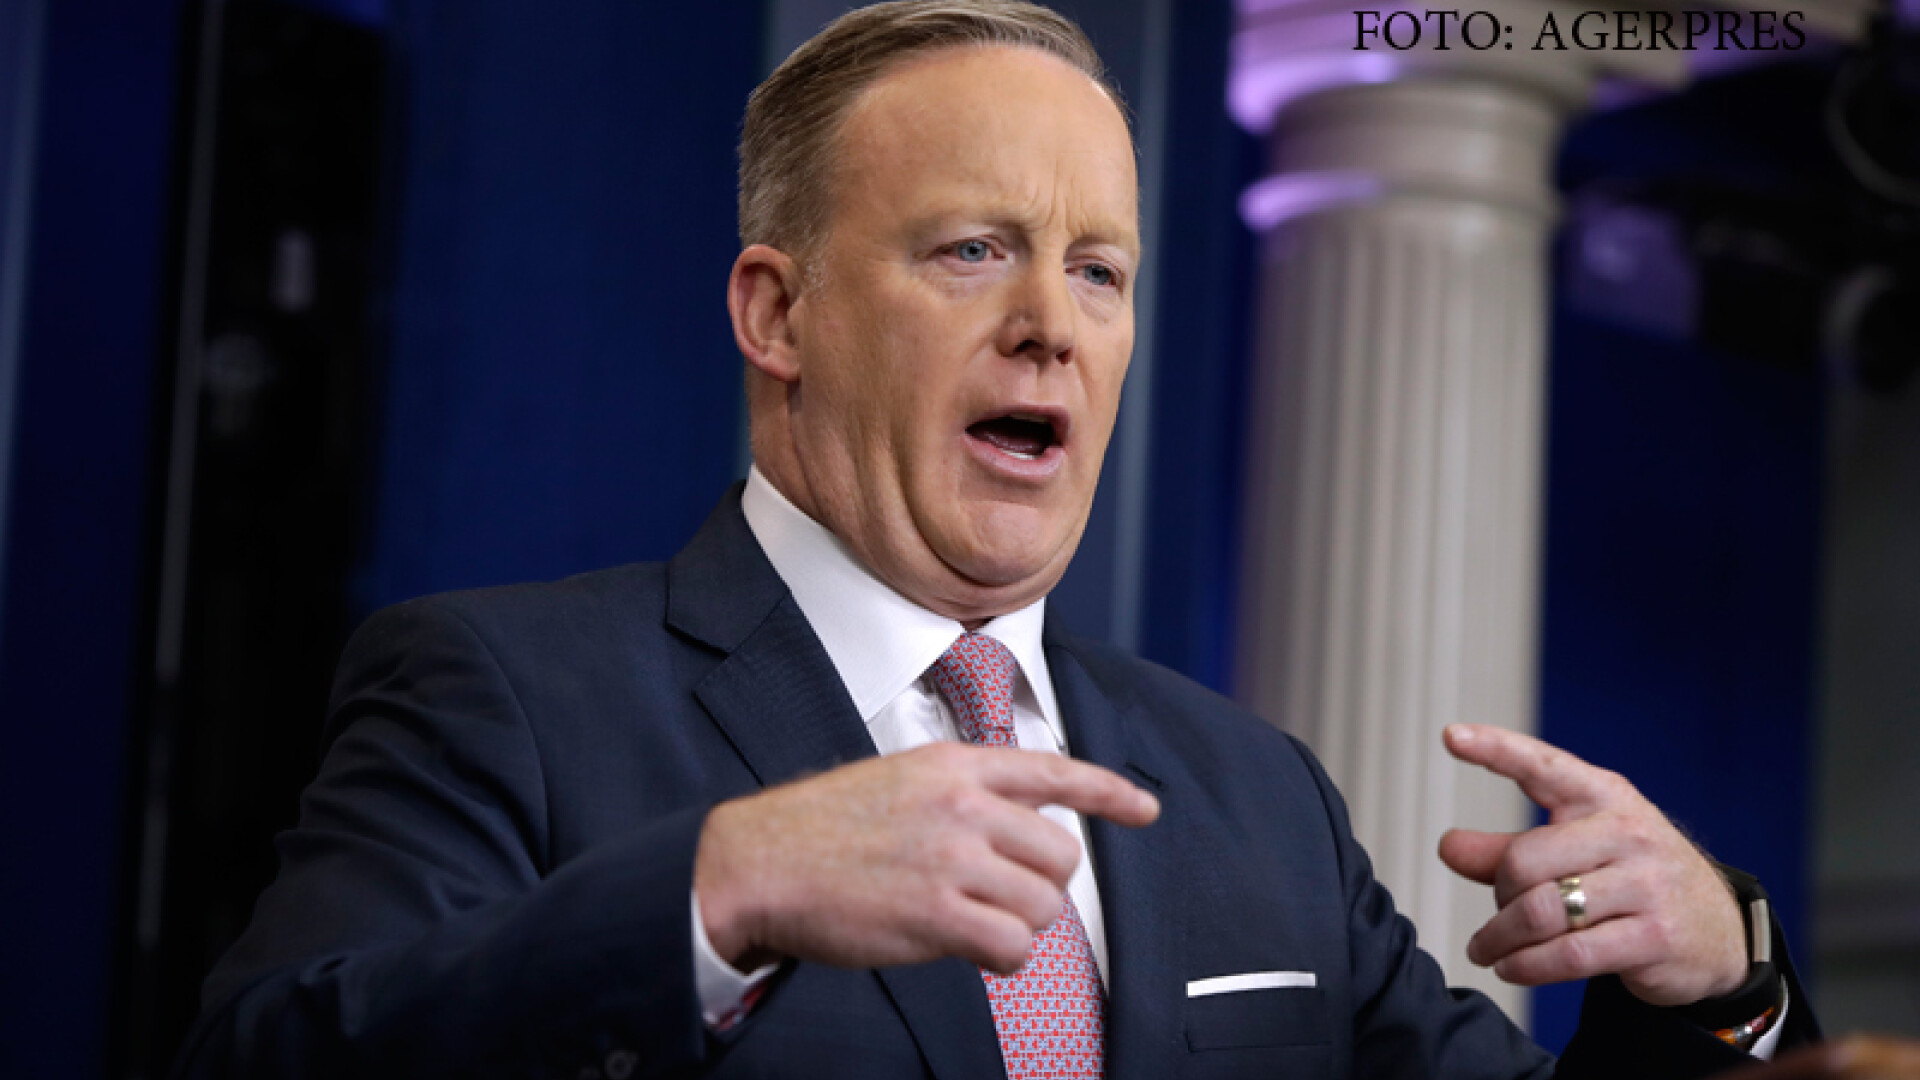 White House press Secretary Sean Spicer speaks during the daily White House briefing